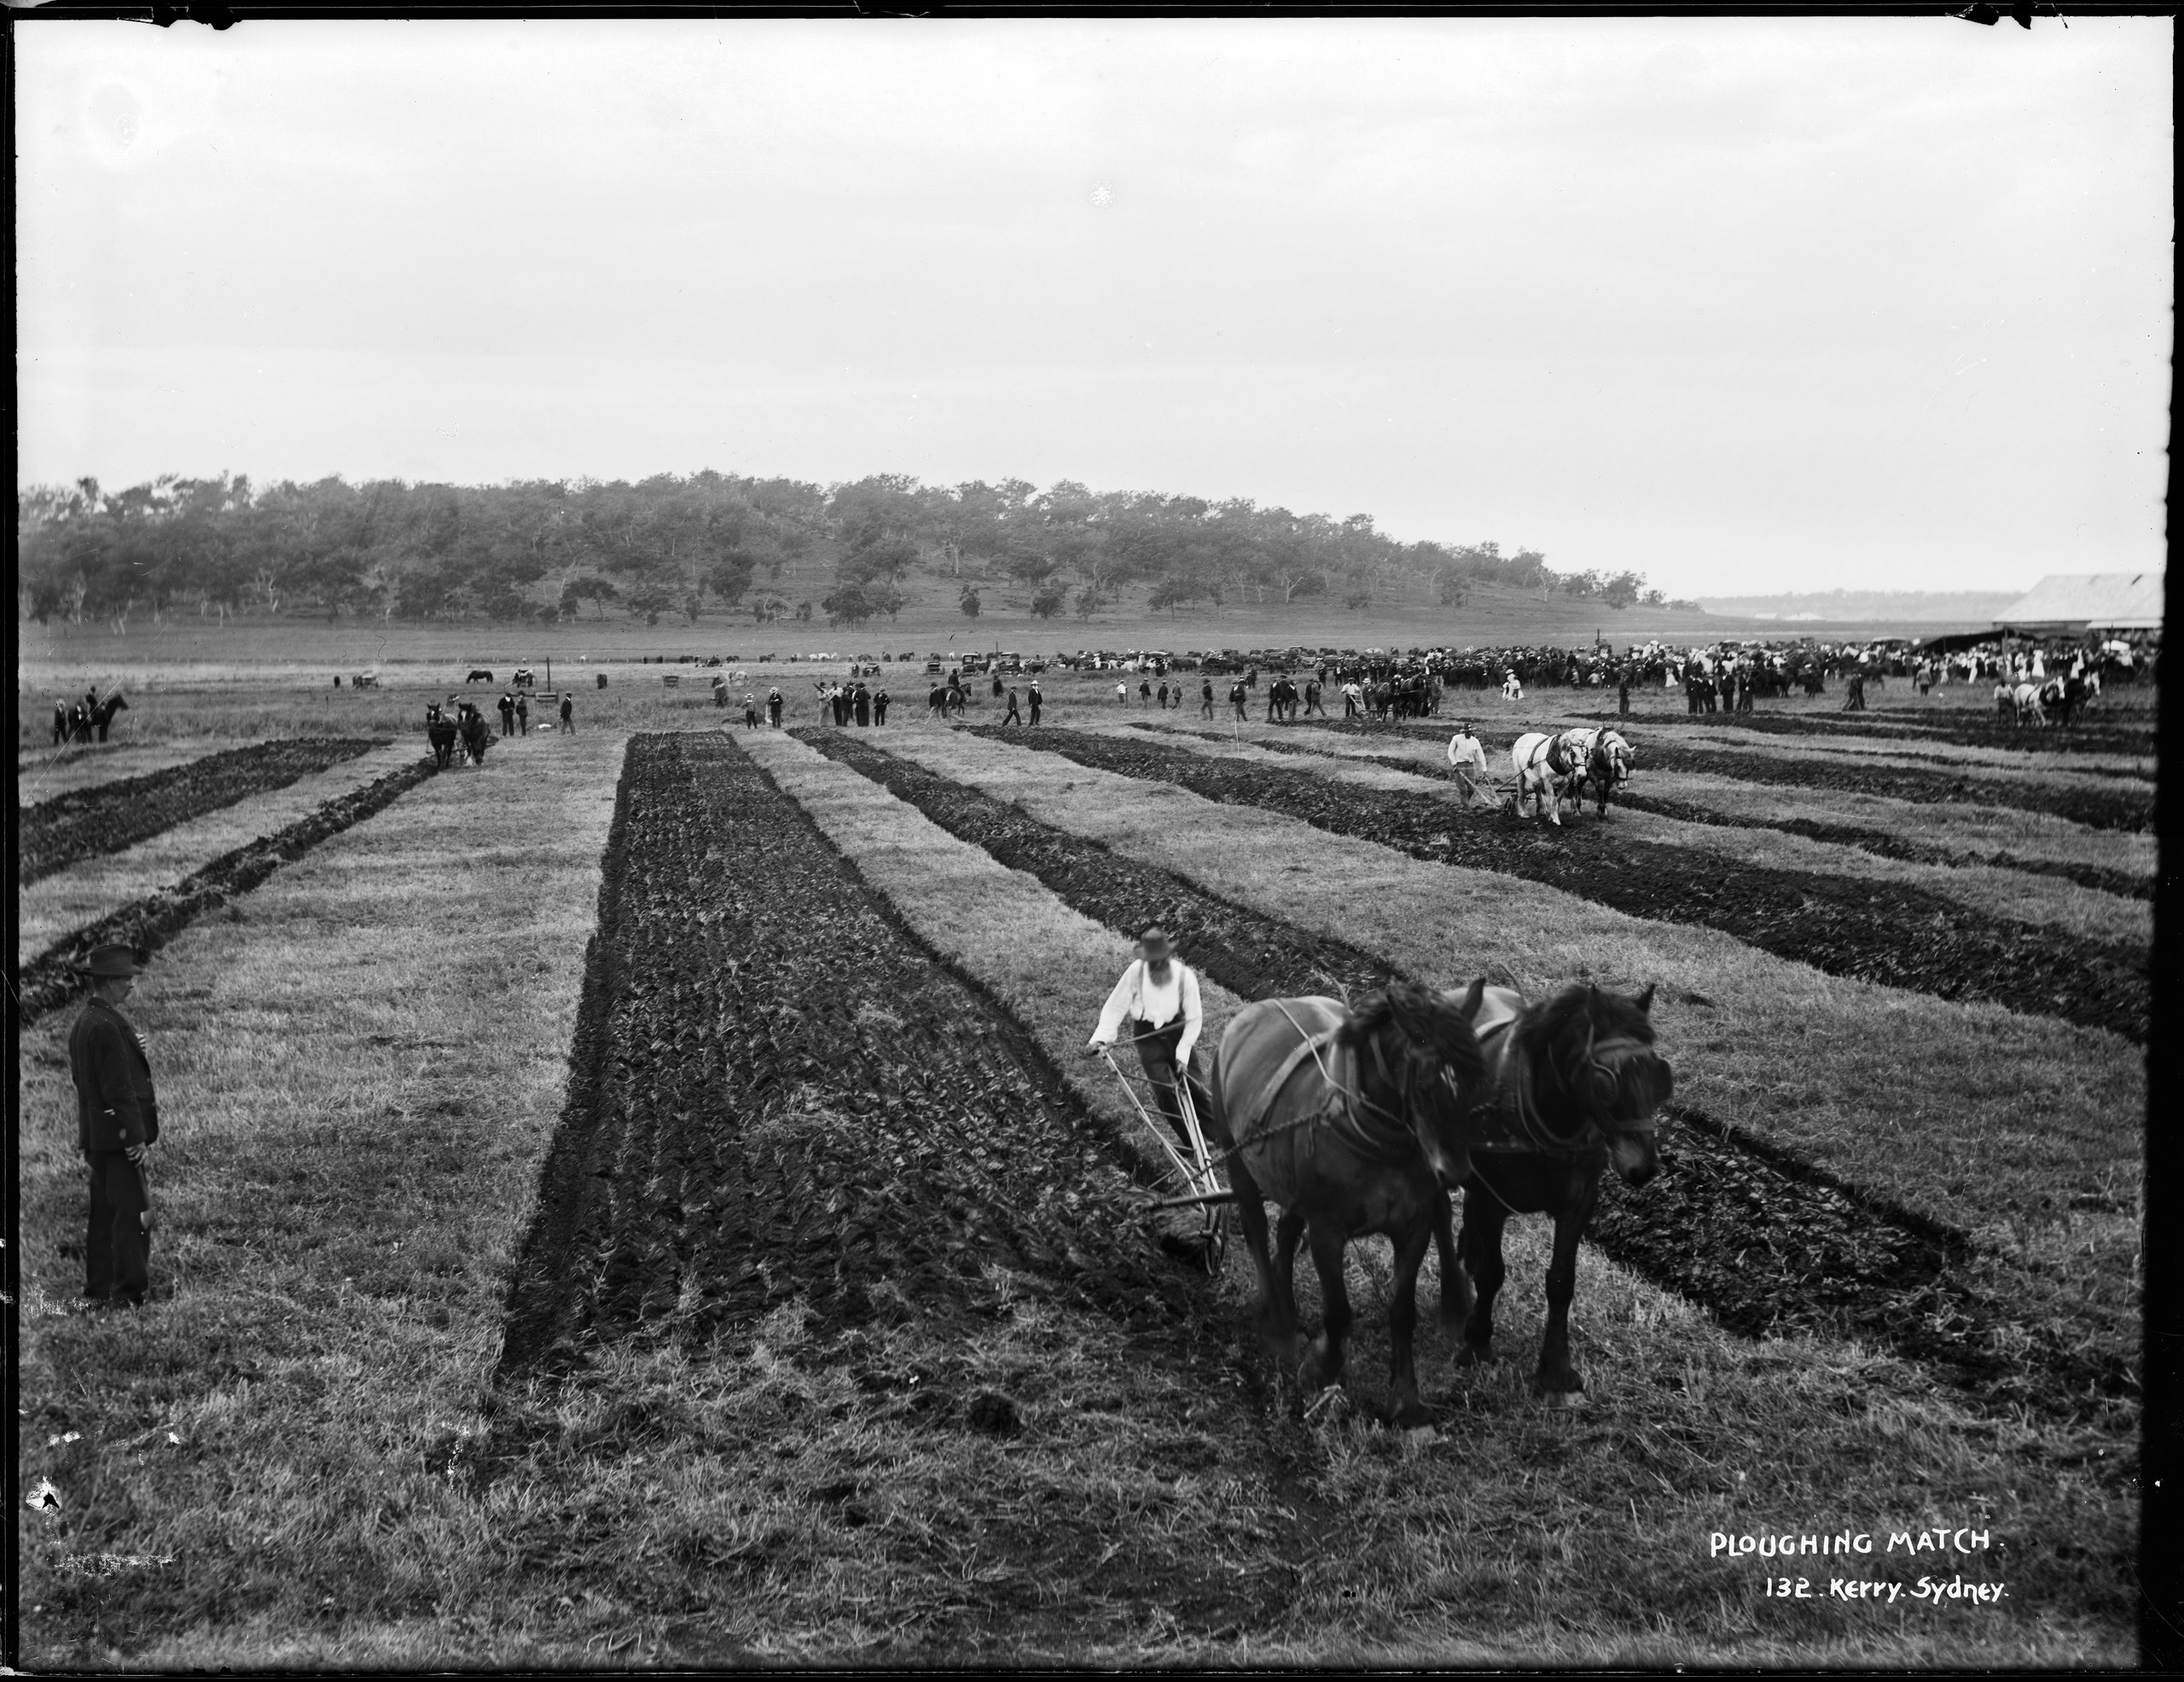 Photograph of a ploughing match